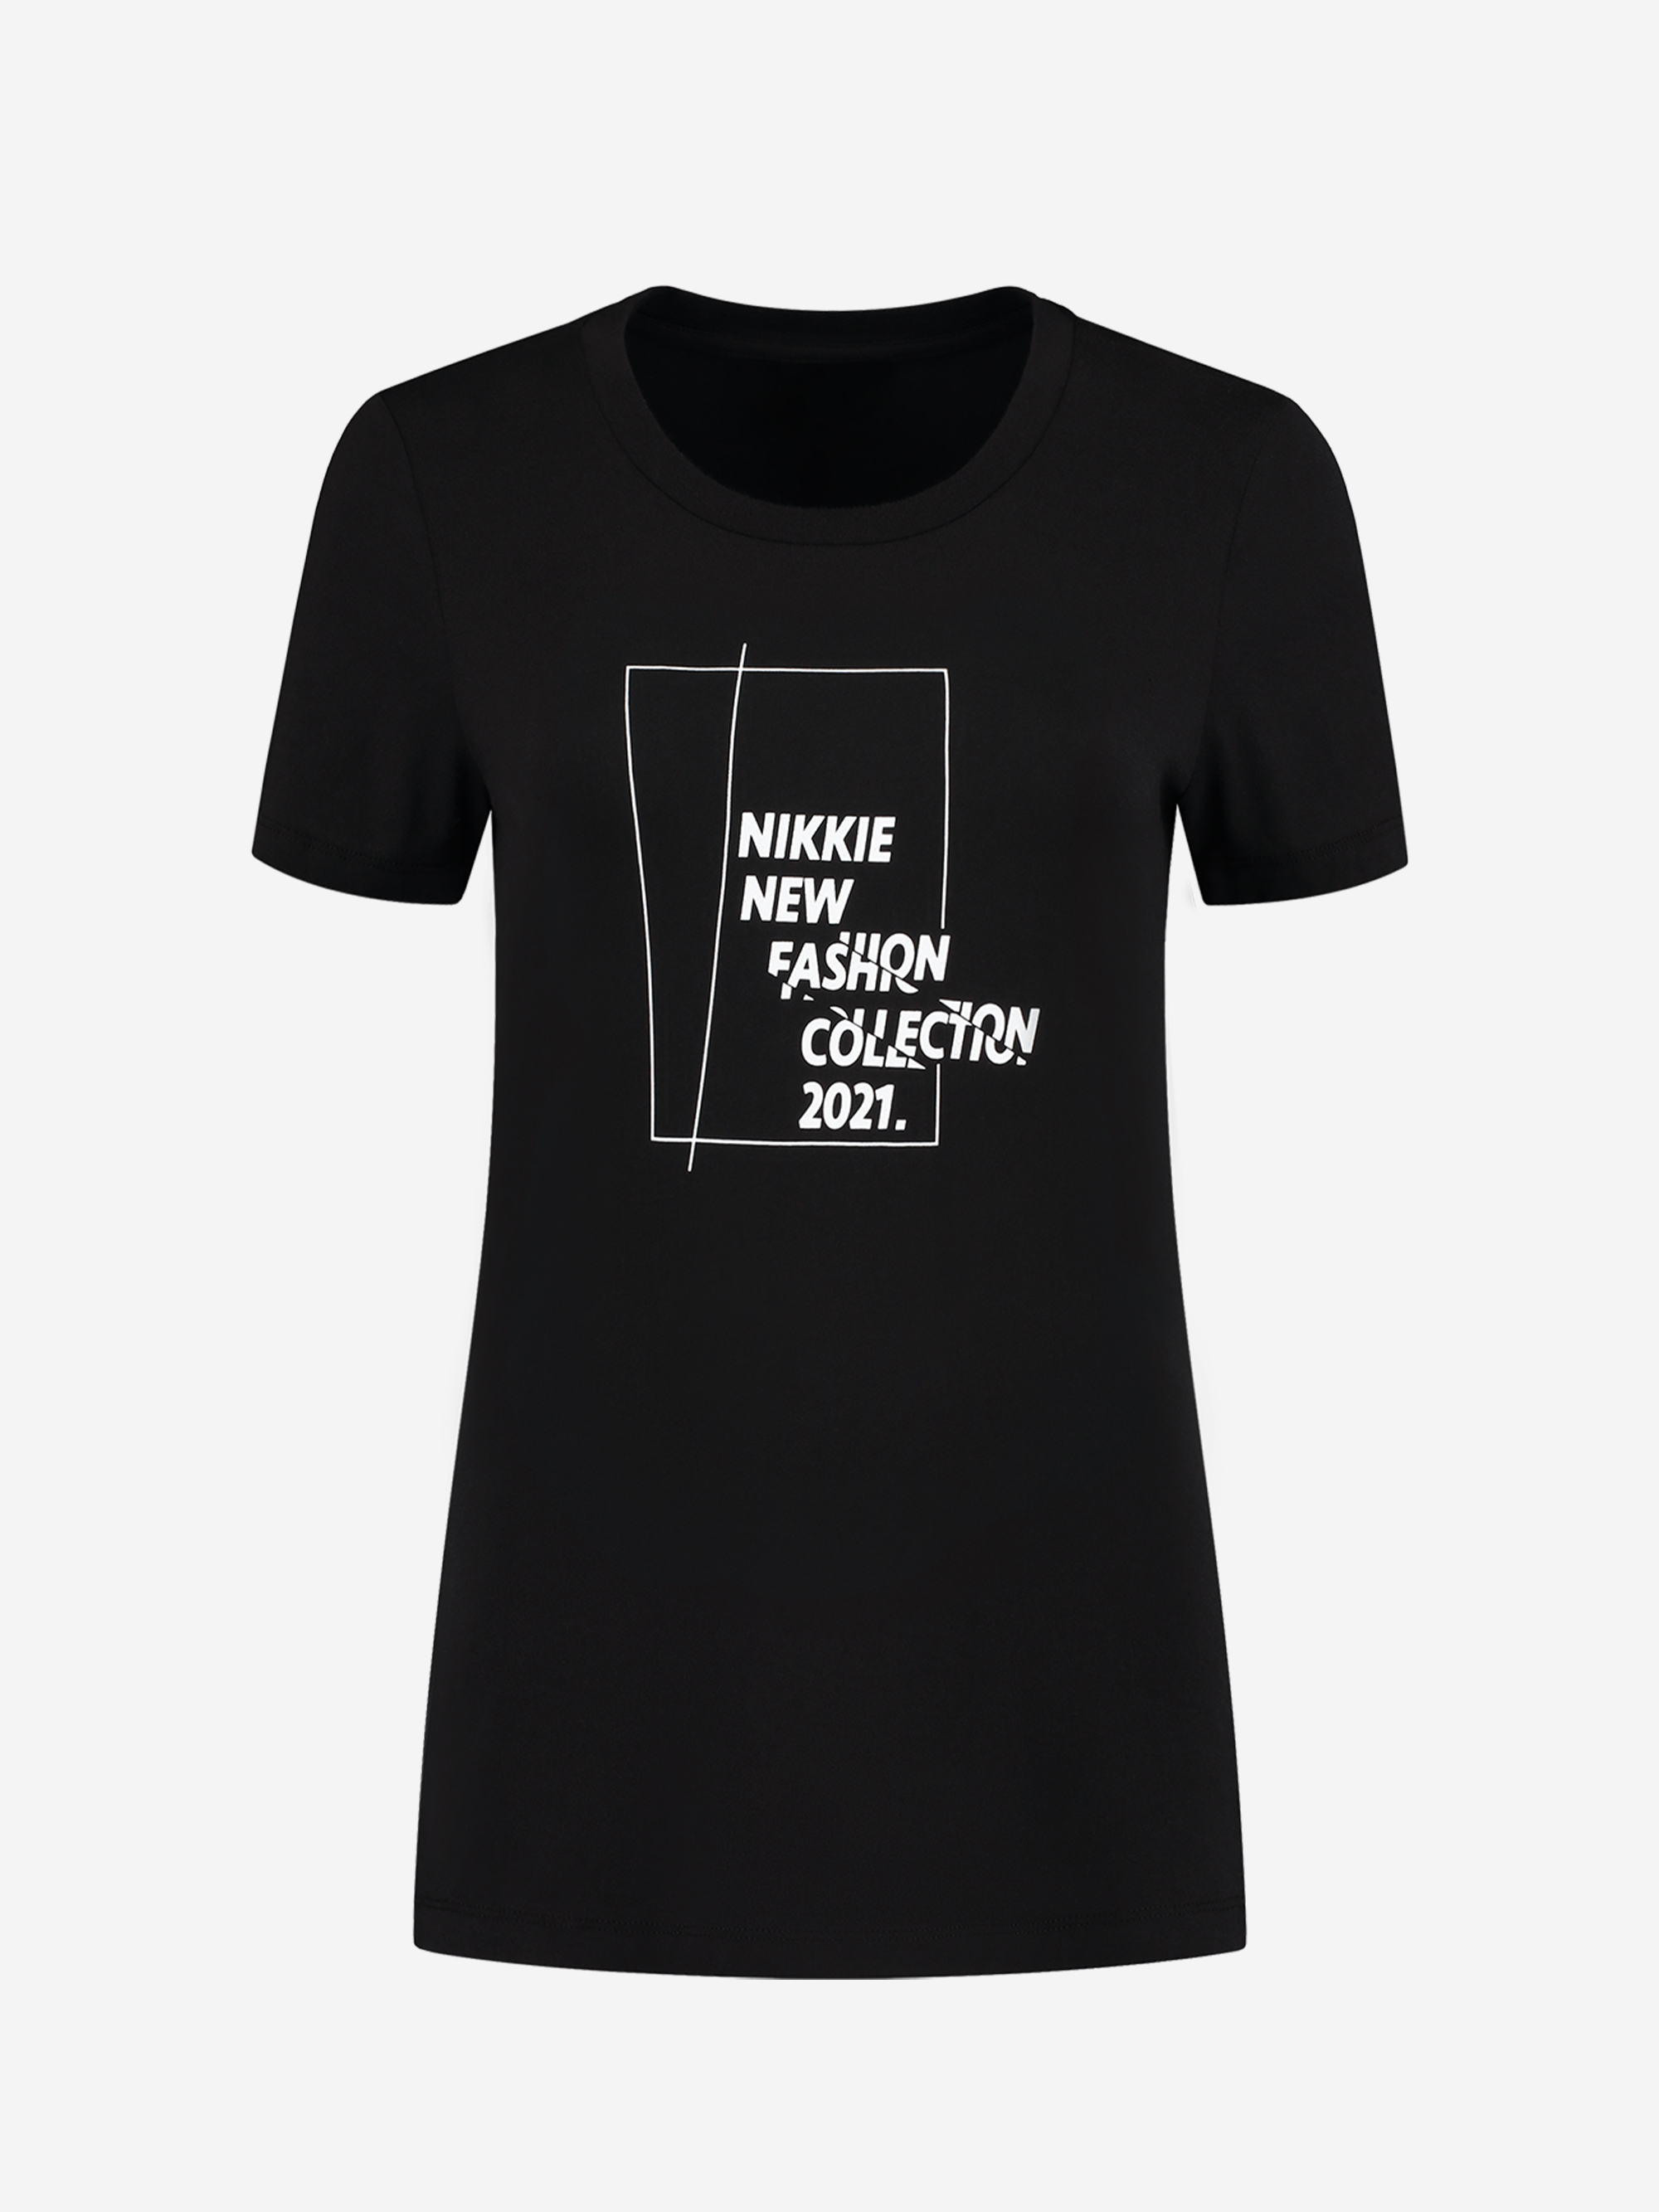 NIKKIE Fashion Collection T-Shirt